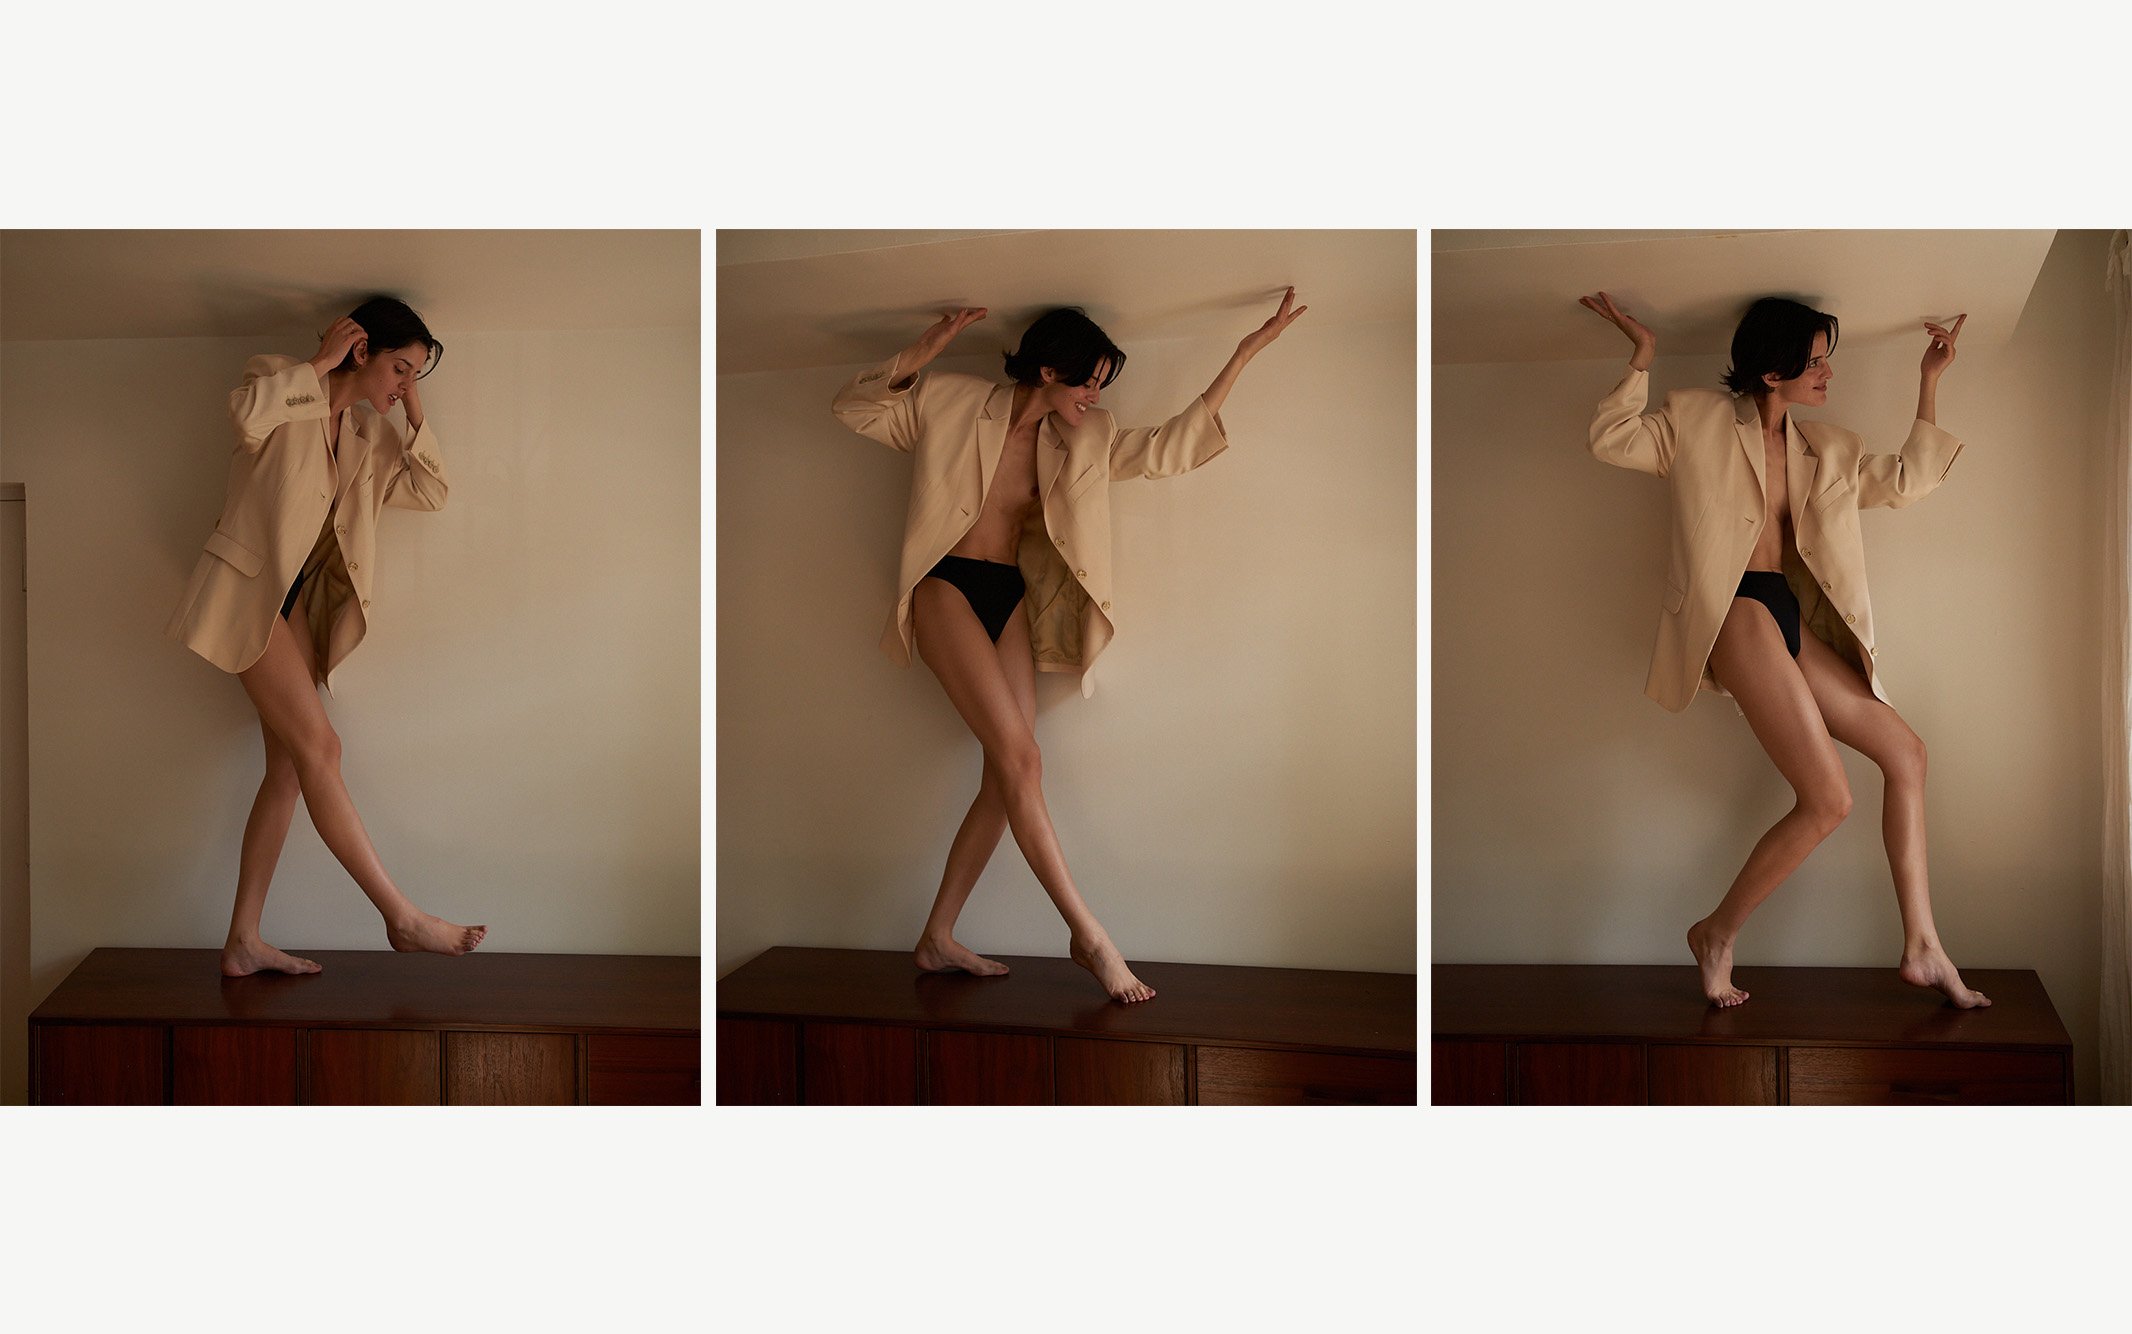 Melany dancing on the credenza